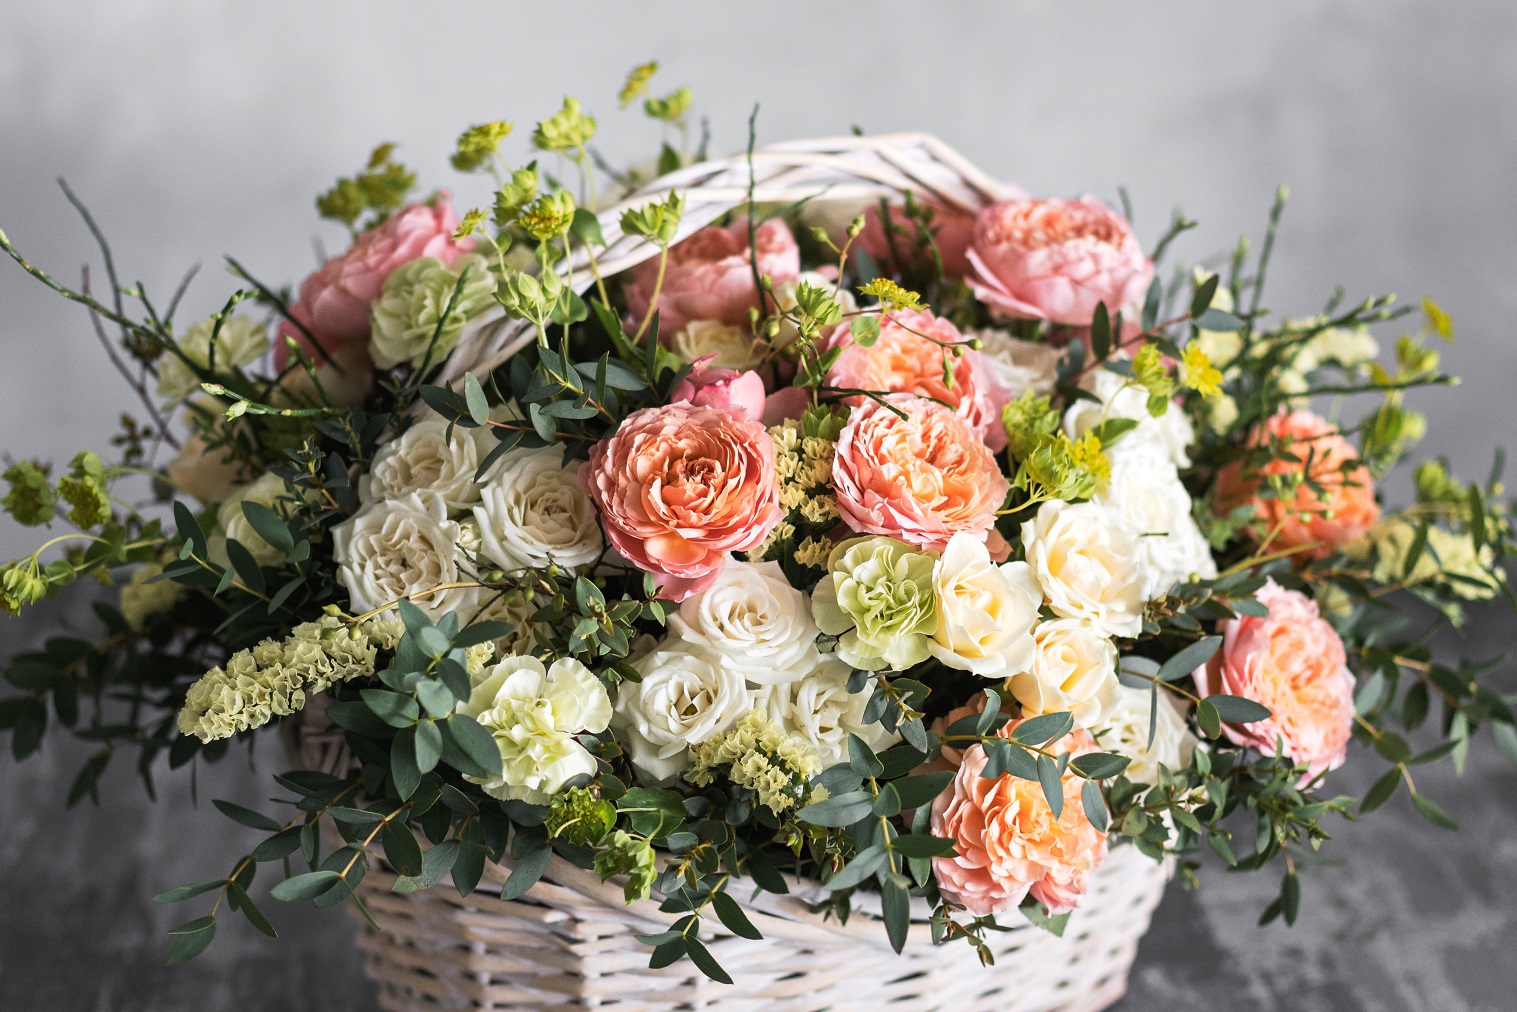 Beautiful Flower Composition A Bouquet In A Wicker Basket. Floristry Concept. Spring Colors